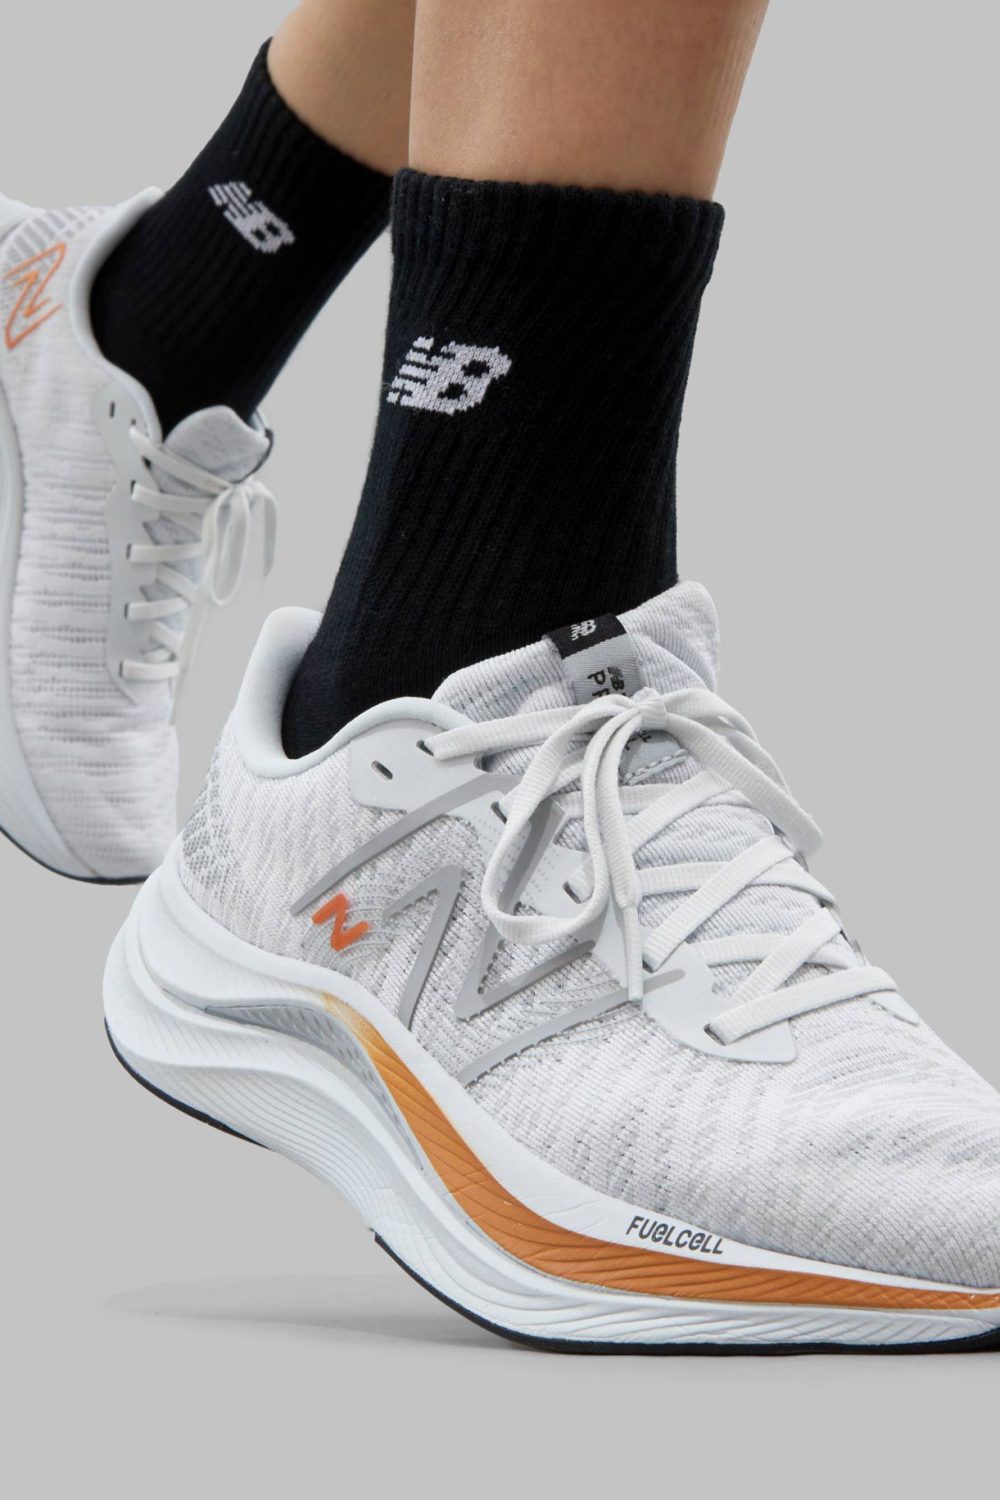 NEWBALANCE-FUELCELL-PROPEL-V4-feature-6-b